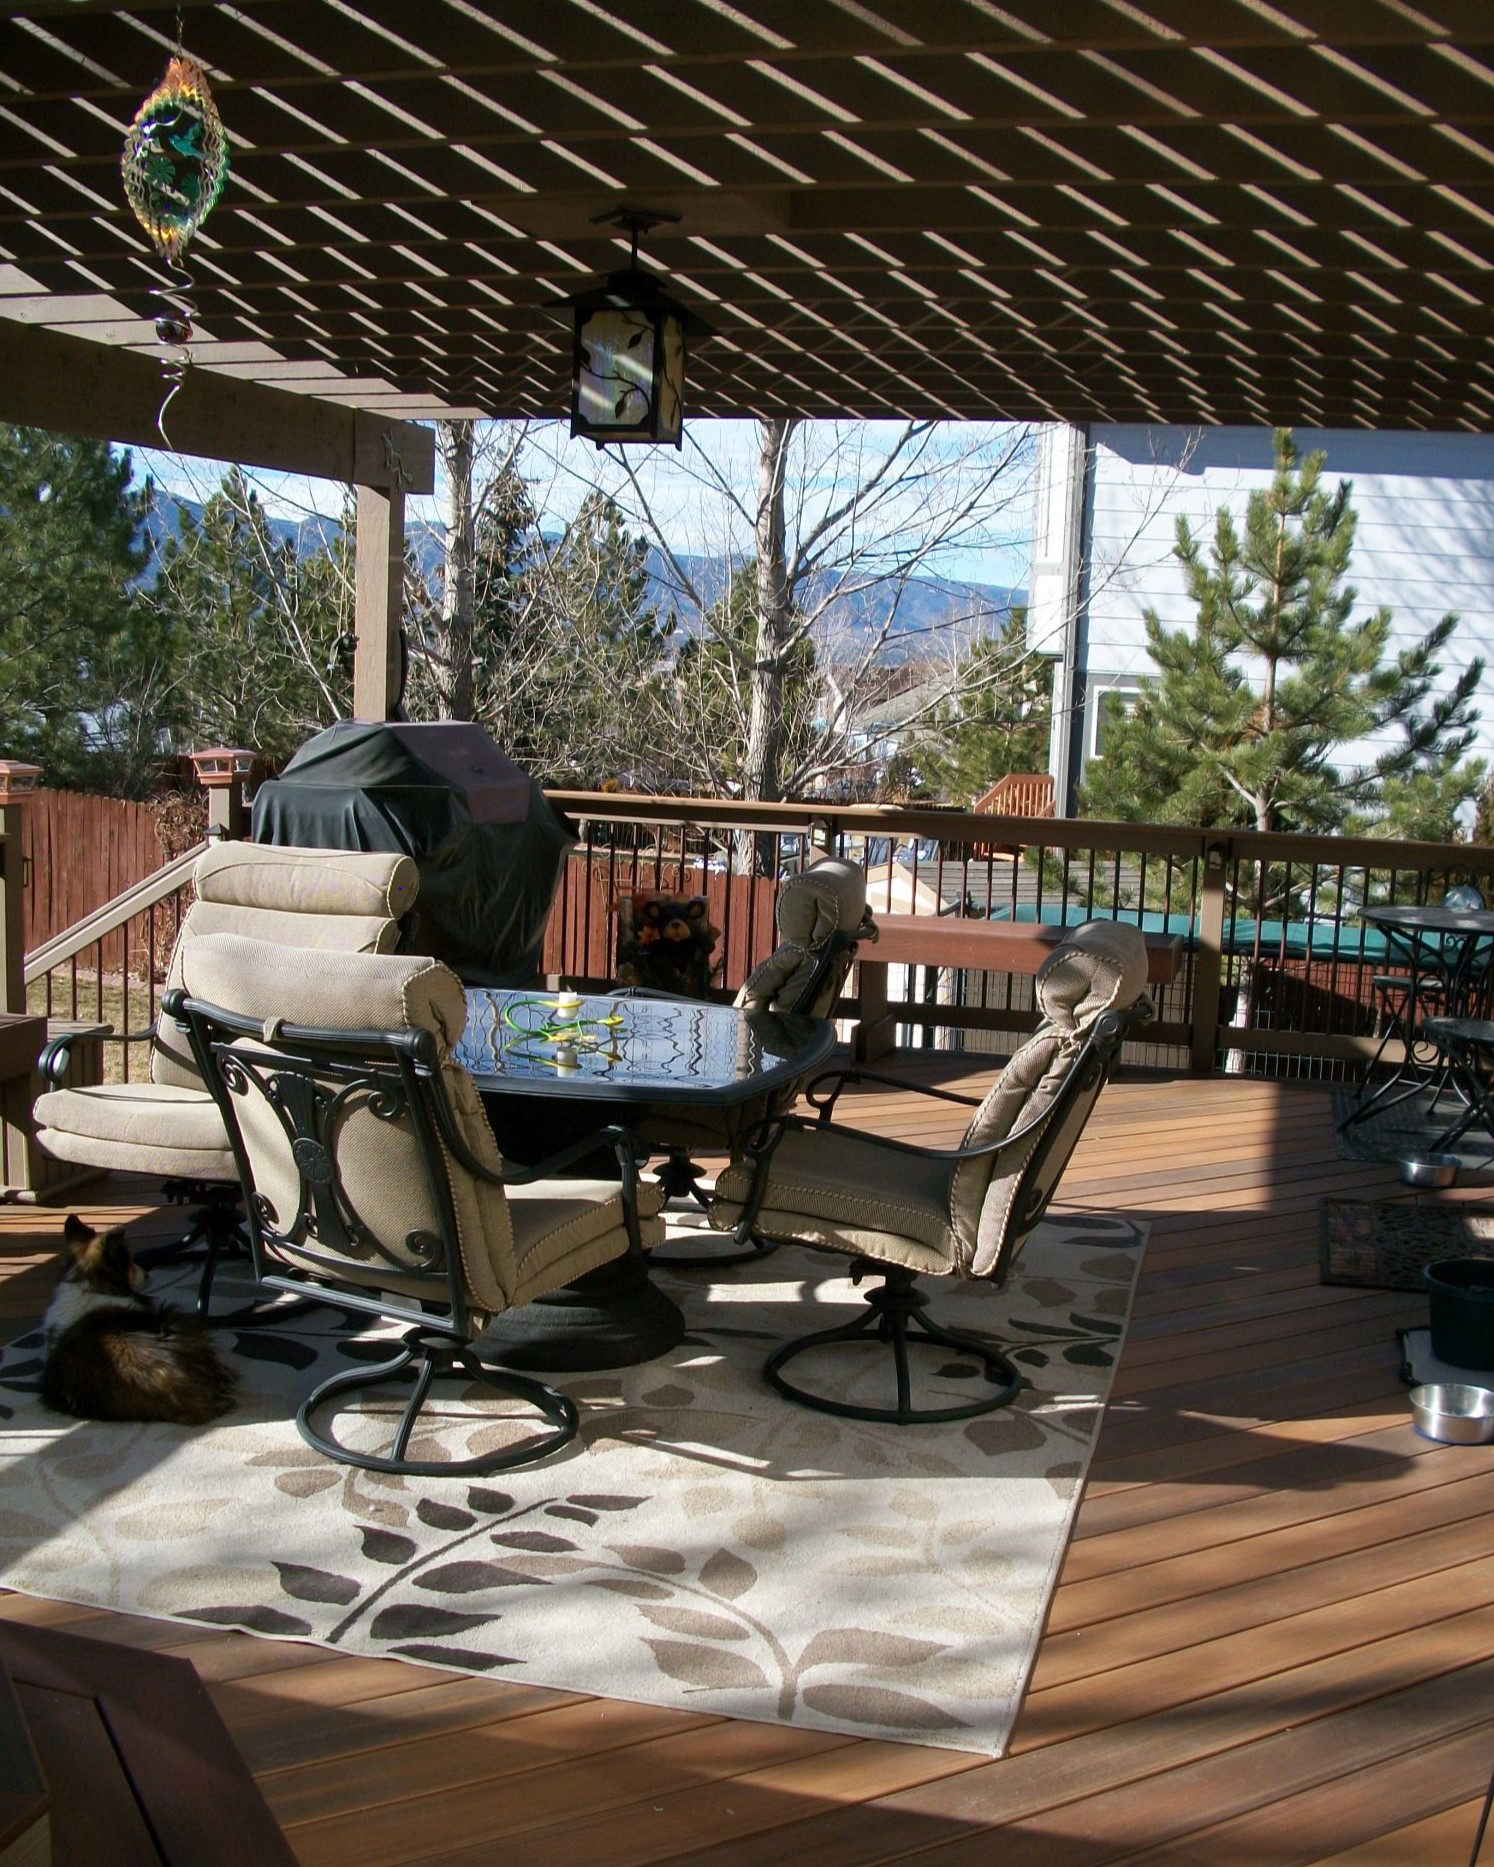 A composite deck with a pergola provides a beautiful, shaded seating area.